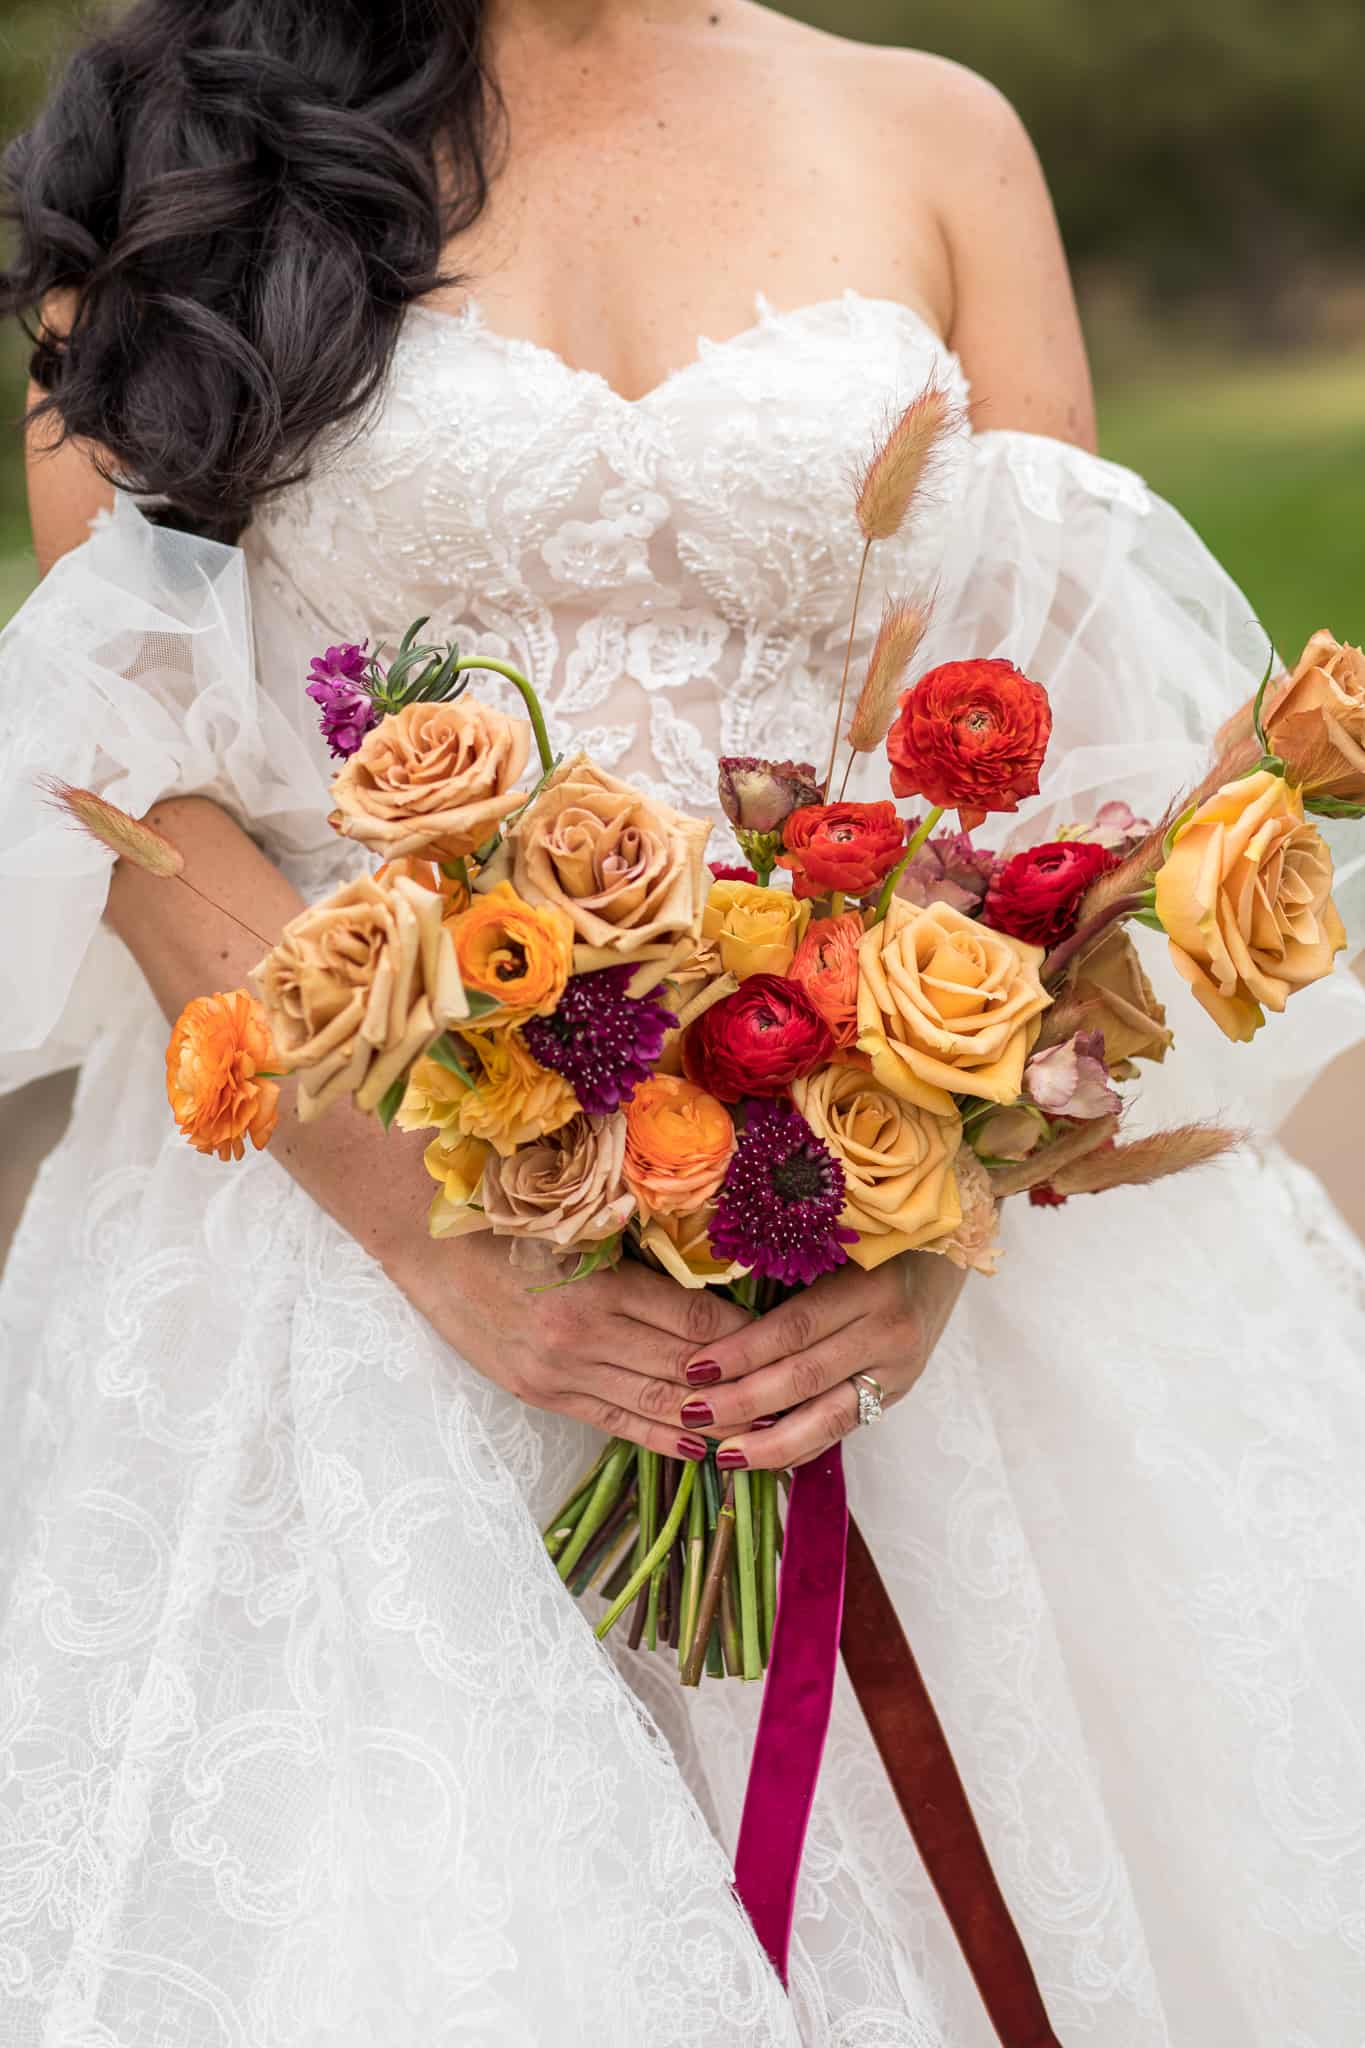 detail shot of bride holding her wedding bouquet with warm fall colors